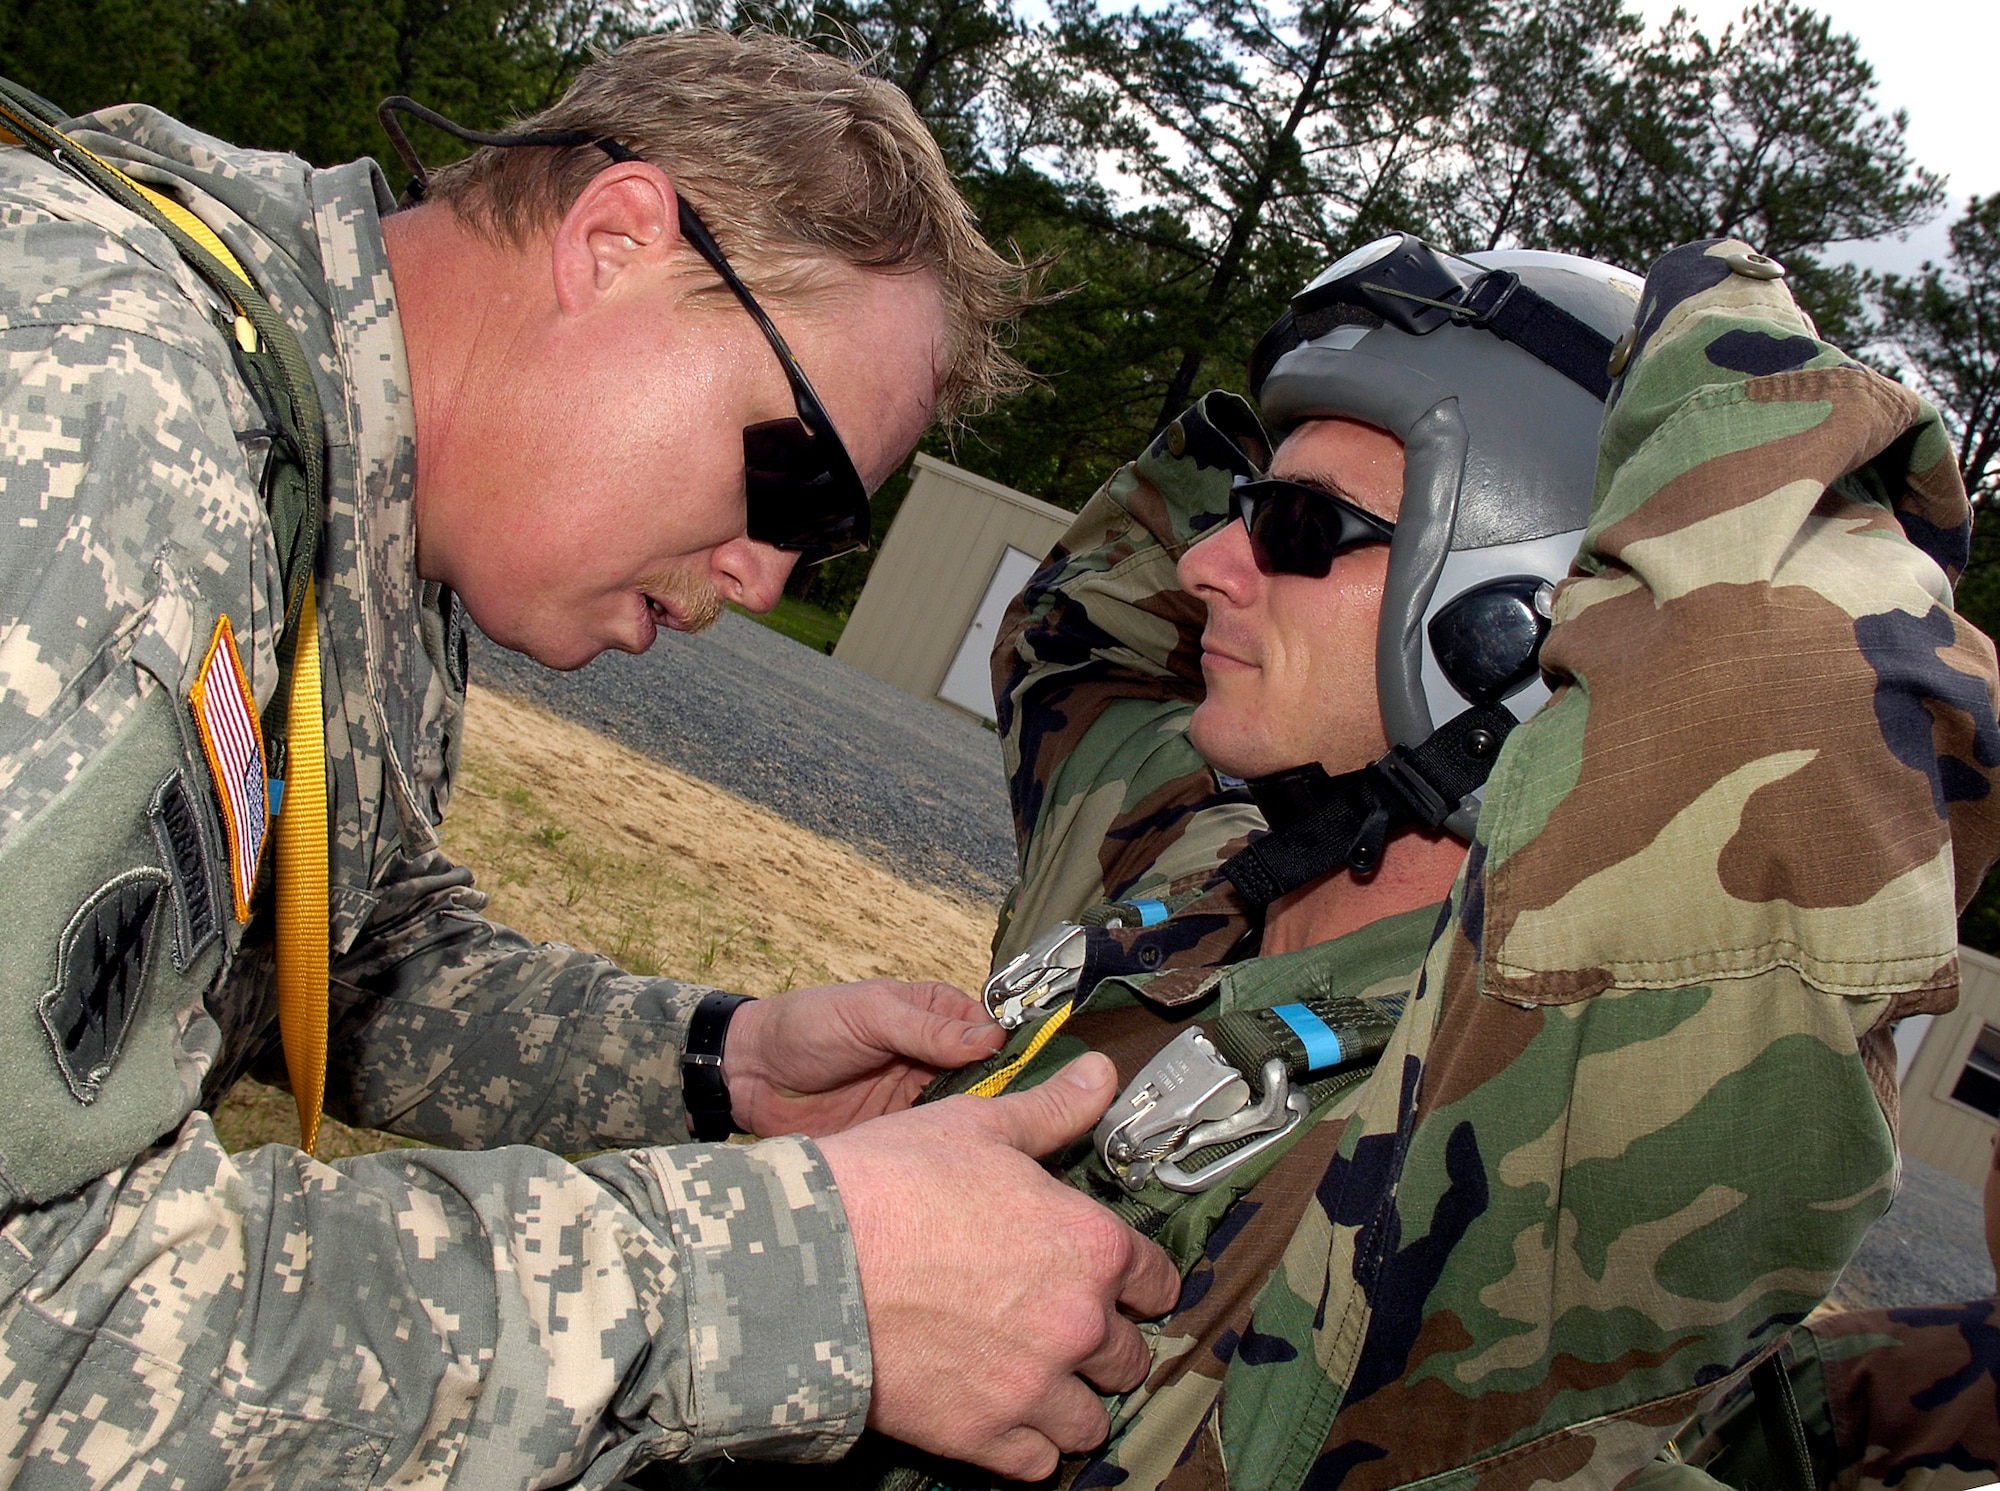 Army Master Sgt. Holland Wiler (left) performs a pre-jump inspection of Staff Sgt. Reed's parachute at the Joint Readiness Training Center at Fort Polk, La., on Wednesday, May 3, 2006. Sergeant Reed, a survival, evasion, resistance and escape specialist, jumped with special operations Soldiers to complete static-line parachute training. (U.S. Air Force photo/Senior Airman Stephen J. Otero)